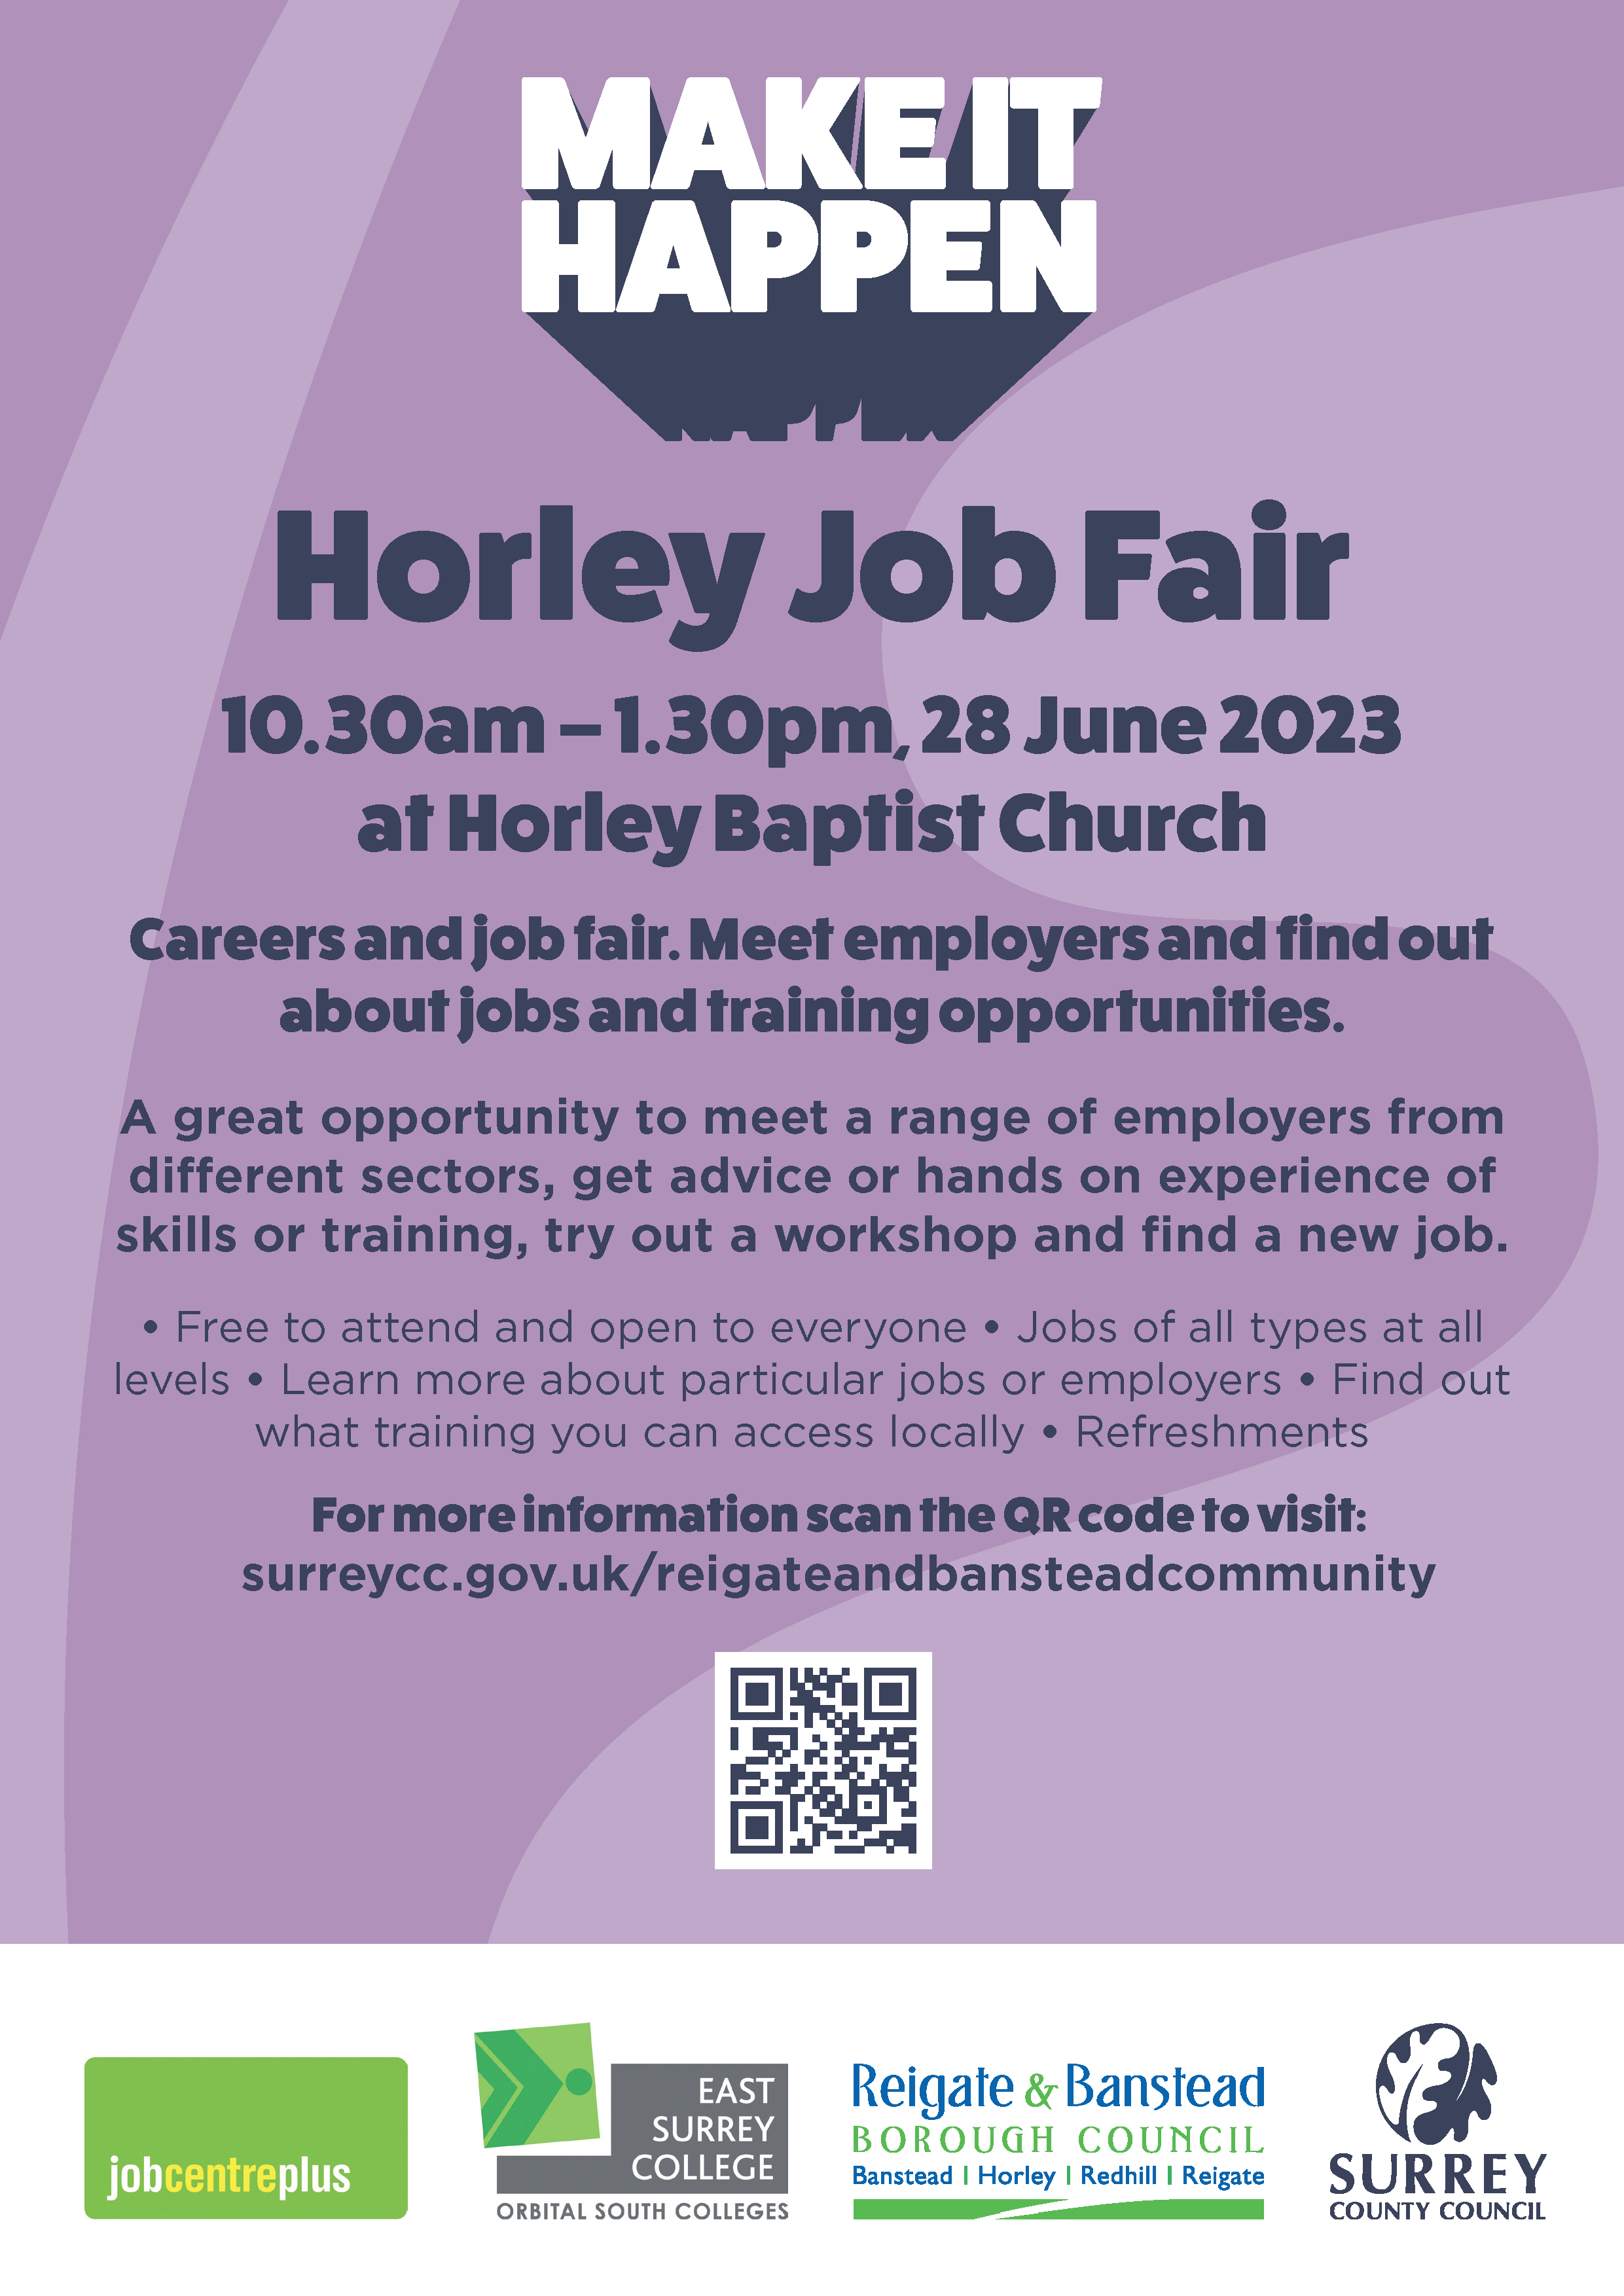 10.30am – 1.30pm, 28 June 2023 at Horley Baptist Church Careers and job fair. Meet employers and find out about jobs and training opportunities. A great opportunity to meet a range of employers from different sectors, get advice or hands on experience of skills or training, try out a workshop and find a new job. • Free to attend and open to everyone • Jobs of all types at all levels • Learn more about particular jobs or employers • Find out what training you can access locally • Refreshments Horley Job Fair For more information scan the QR code to visit: surreycc.gov.uk/reigateandbansteadcommunity